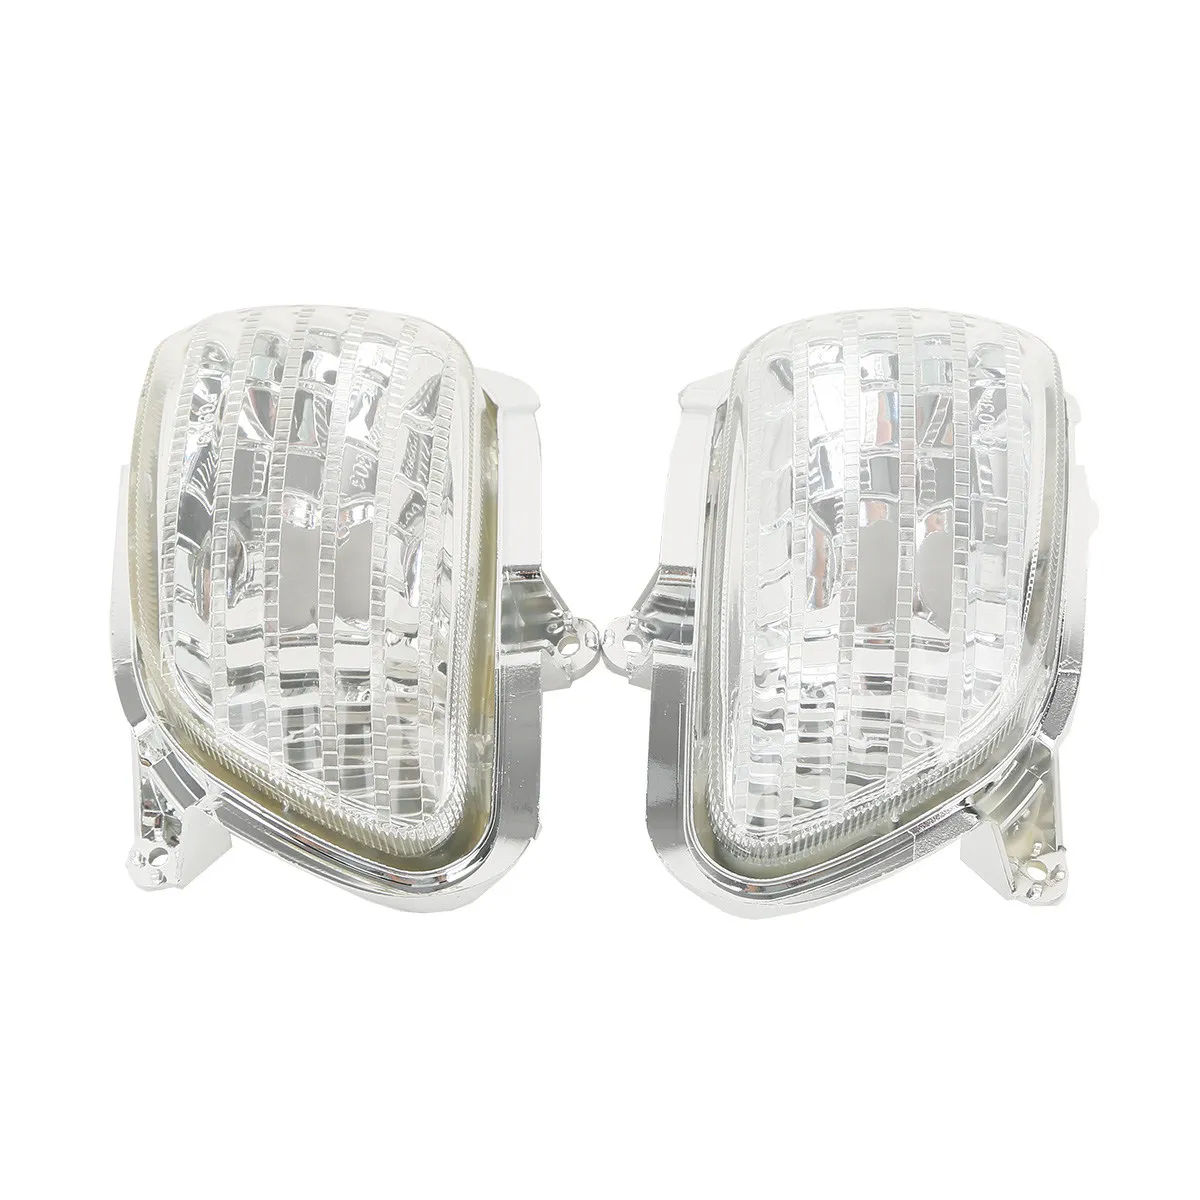 Motorcycle Front Turn Signal Light Lens Shell For Honda Gold Wing 1800 GL1800 2001-2015 2014 2008 09